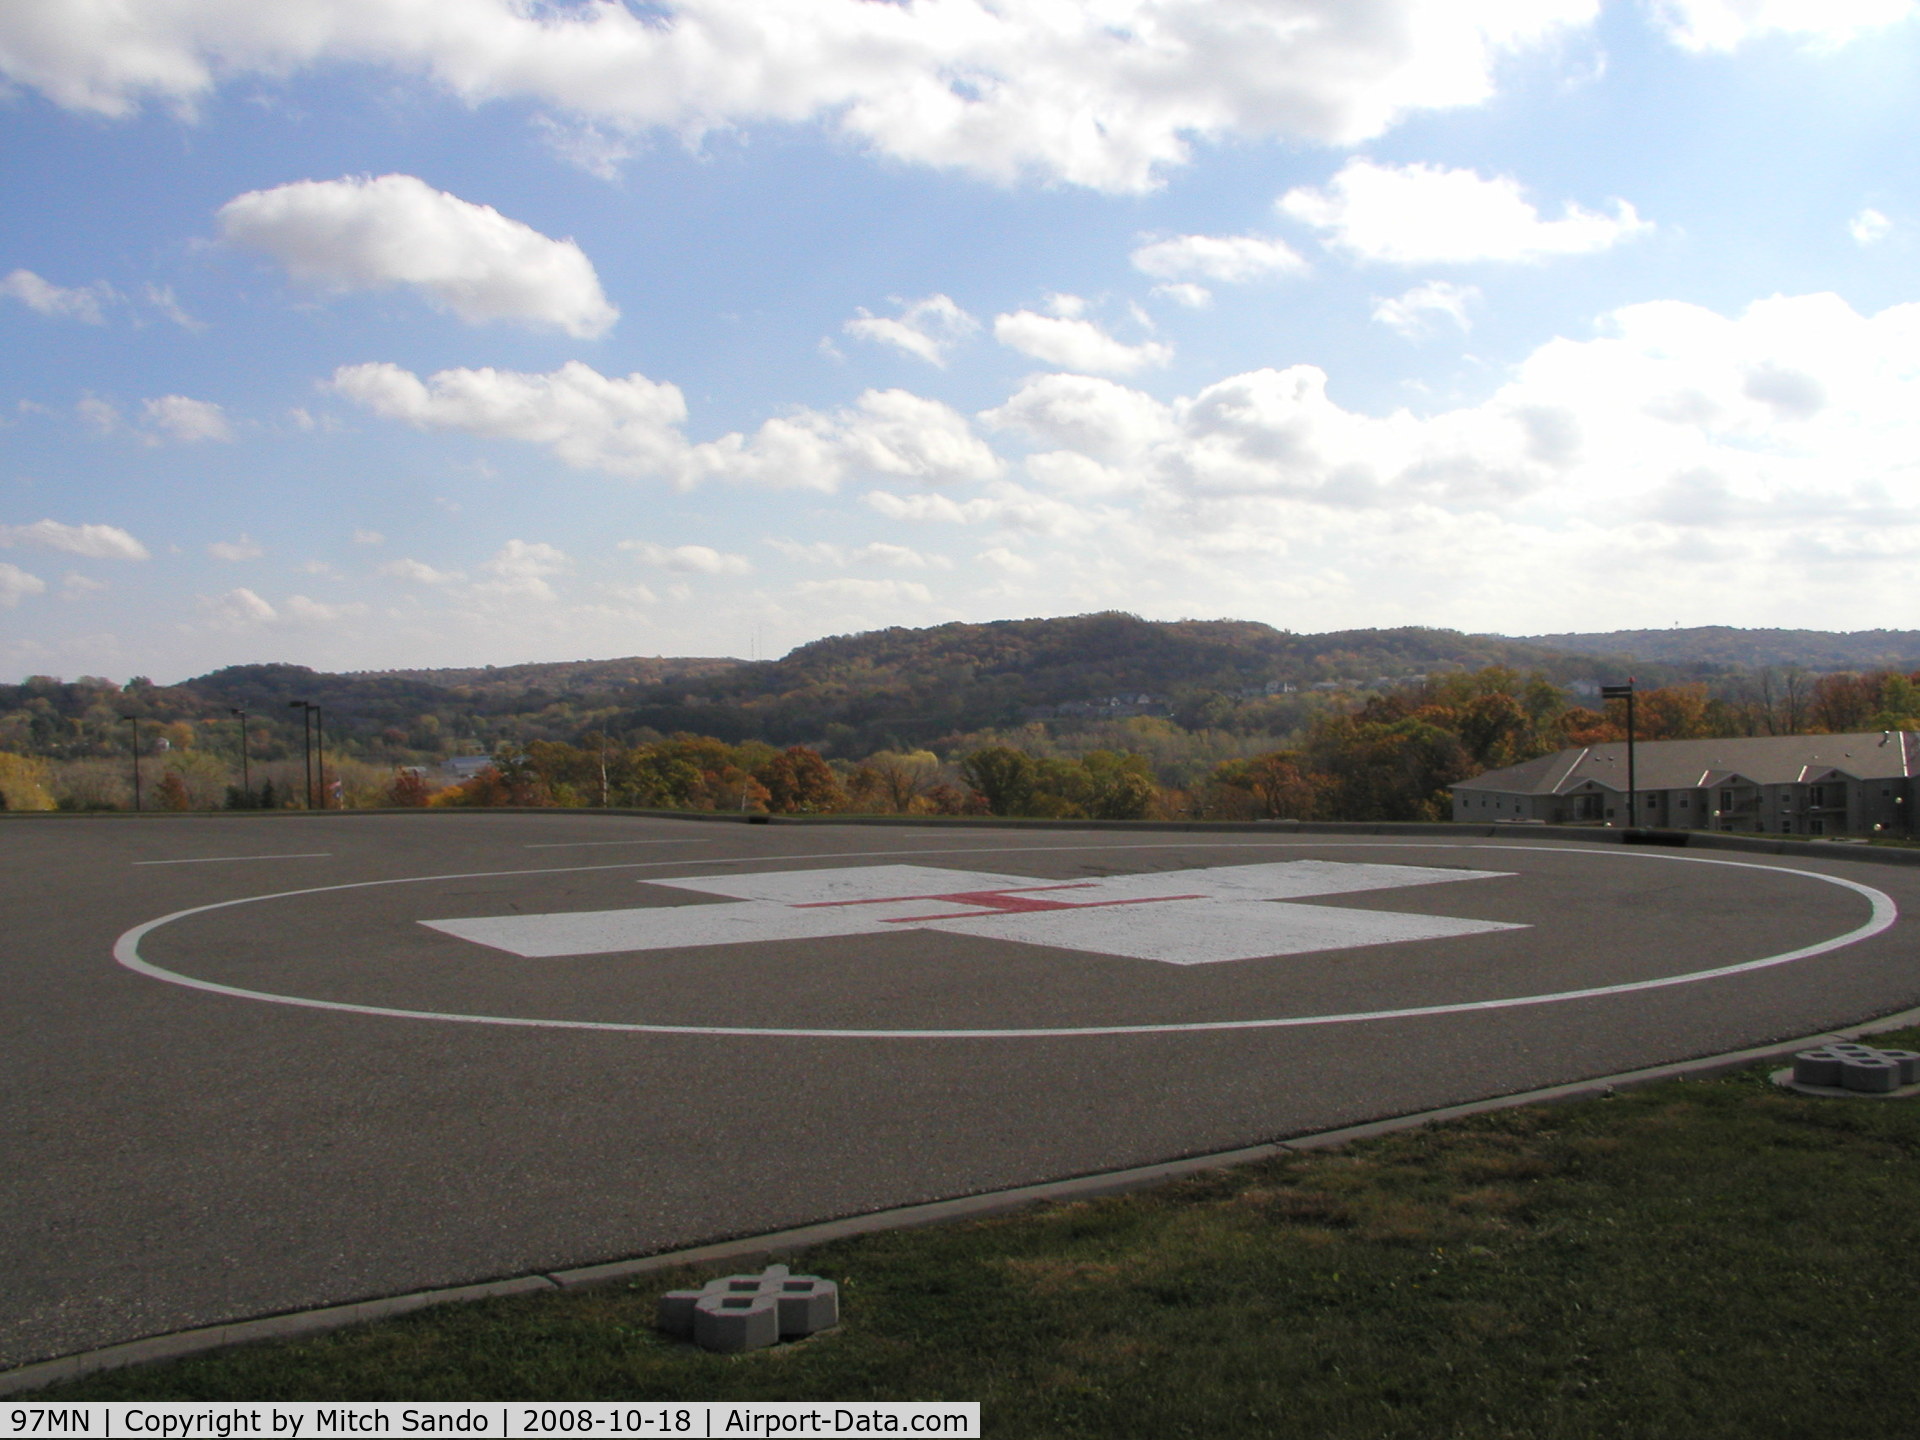 Fairview Red Wing Medical Center Heliport (97MN) - Fairview-Red Wing Medical Center in Red Wing, MN.